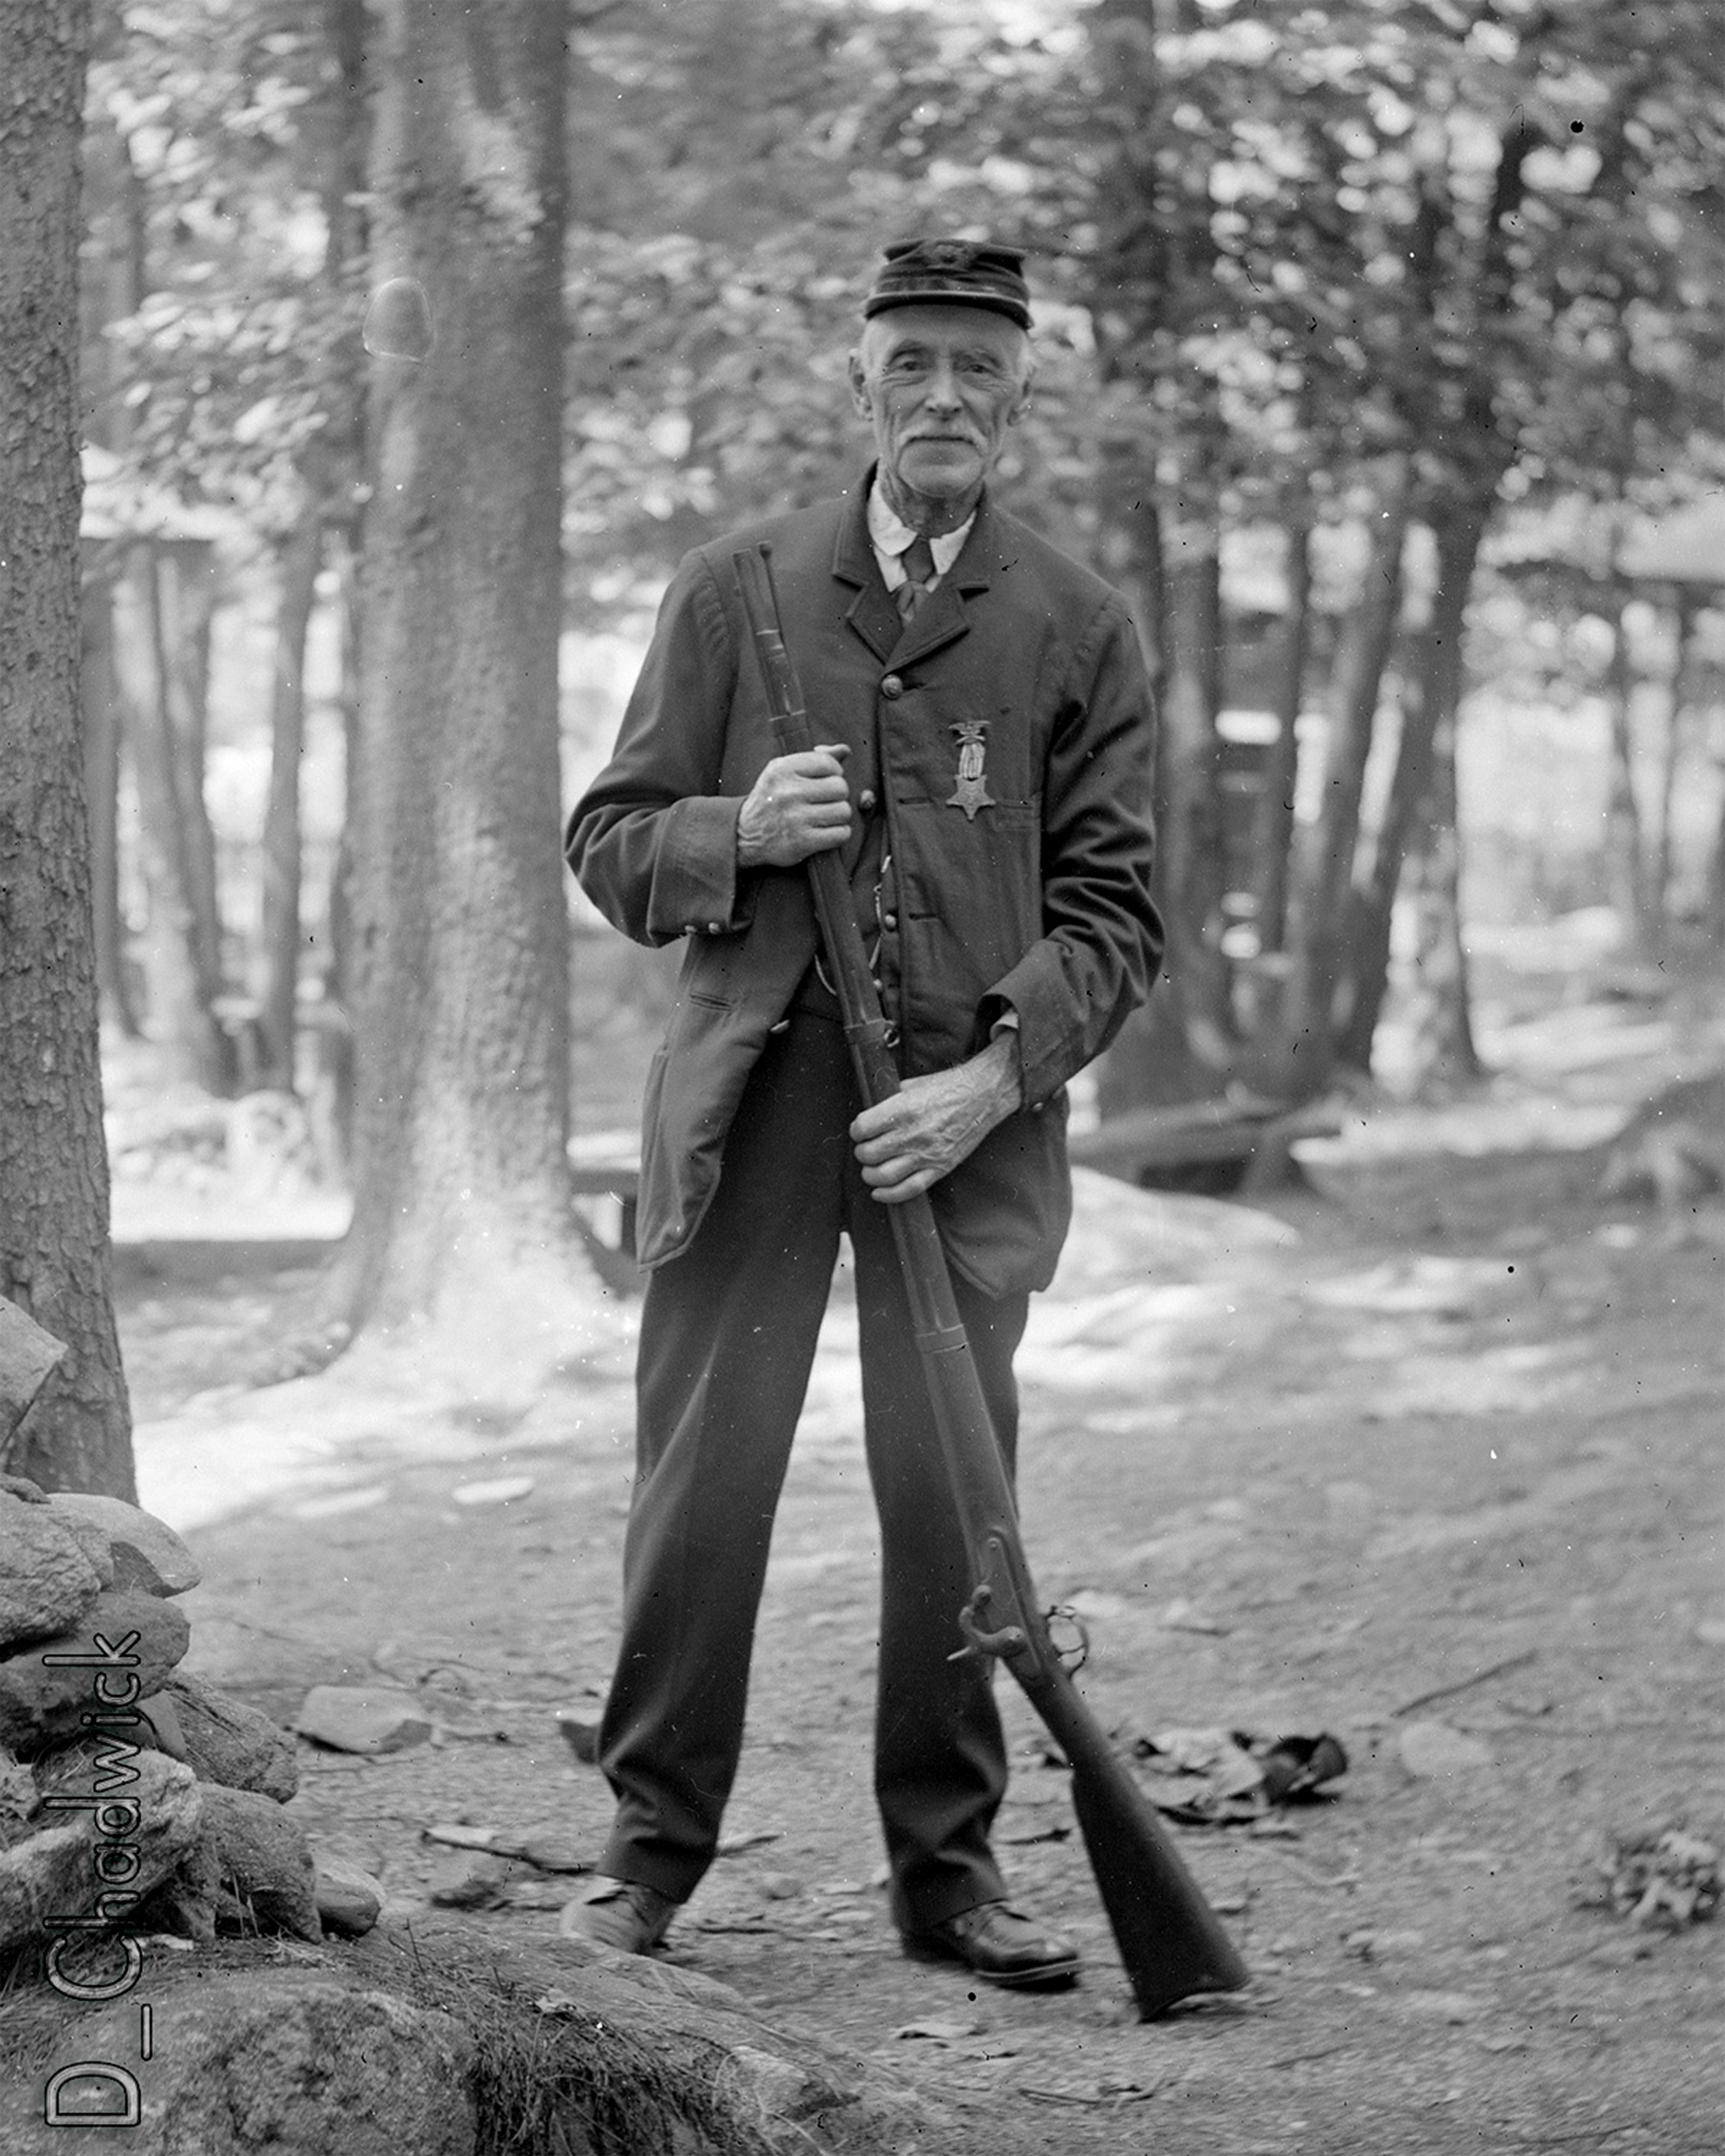 This came from Eastern upstate New York so from the 484 on his Kepi it’s my best guess he was a member of the Carlisle D. Beaumont GAR Post 484 in Keeseville, New York.  If anyone knows anything about that Post or the type of musket he’s holding could you let us know? Scanned from the original 4x5 inch glass negative. View full size.